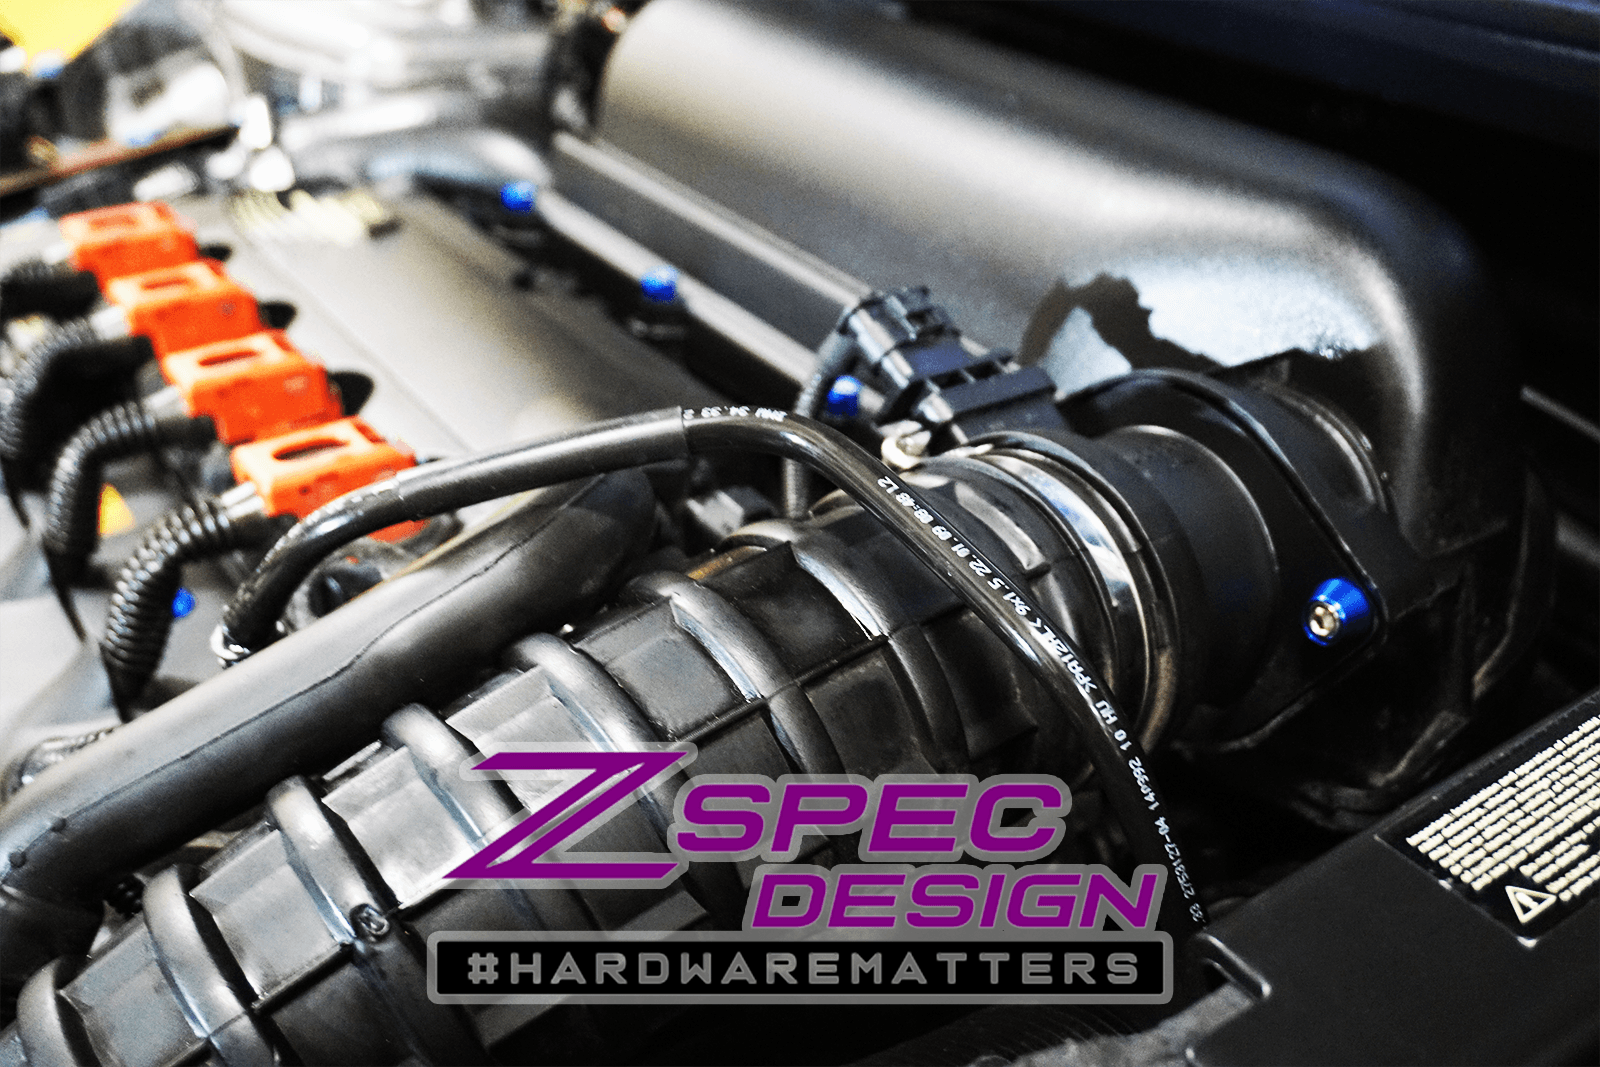 ZSPEC Stage 3 Dress Up Bolts® Fastener Kit for '07-14 Mini Clubman R55 by ZSPEC Design dress up bolts washers beauty bolts socket cap red blue black purple gold gunmetal grey white green peach  Engine Bay Upgrade Performance